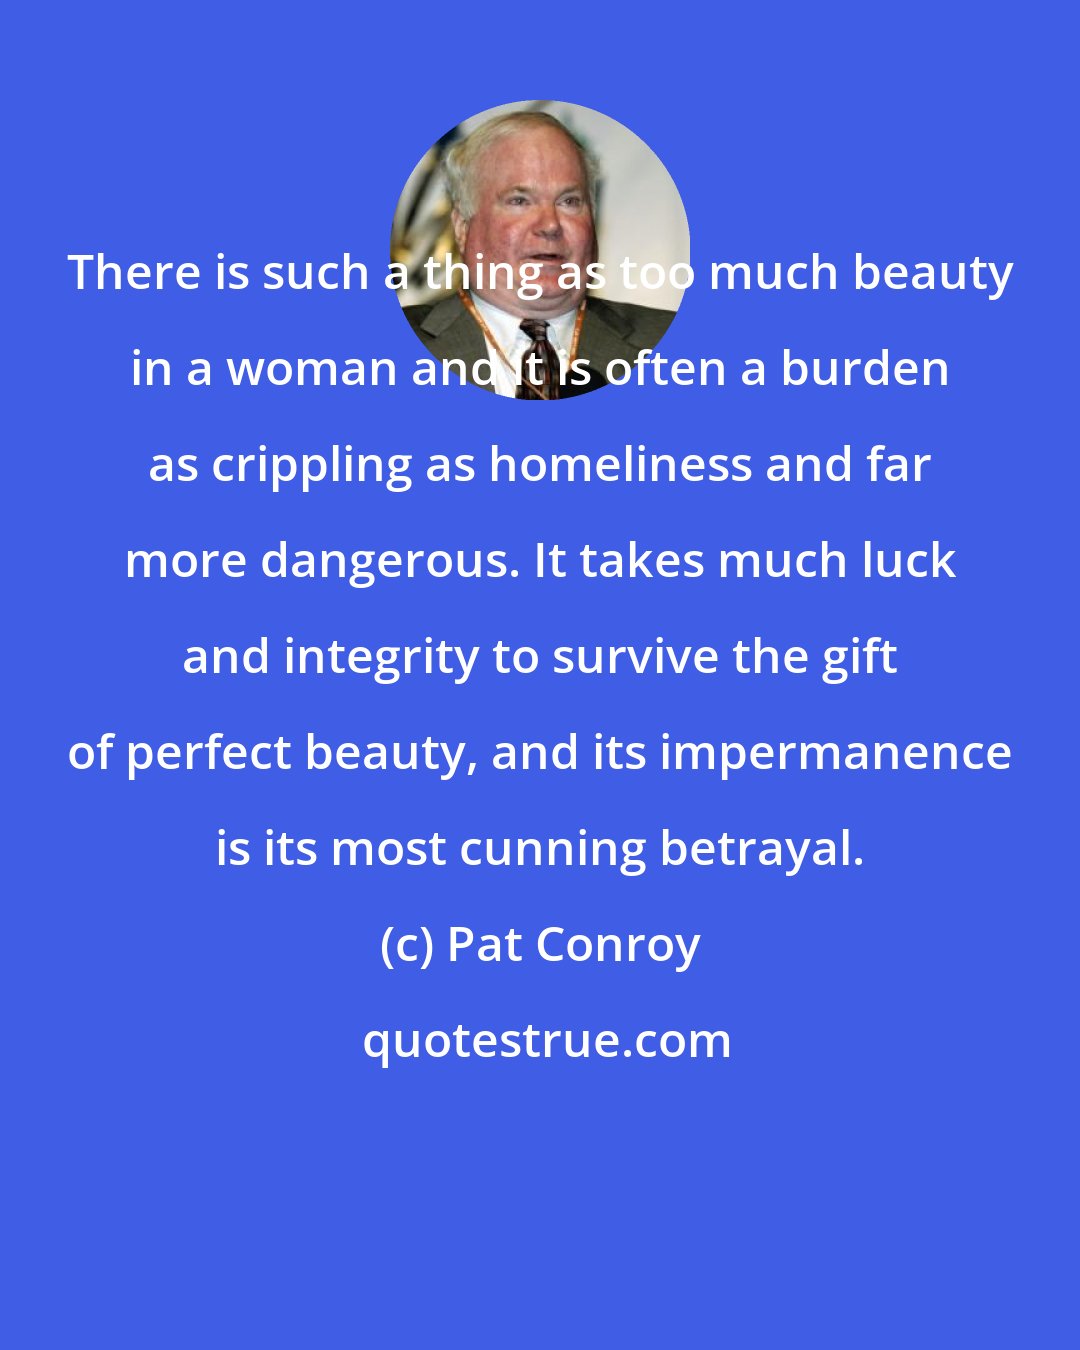 Pat Conroy: There is such a thing as too much beauty in a woman and it is often a burden as crippling as homeliness and far more dangerous. It takes much luck and integrity to survive the gift of perfect beauty, and its impermanence is its most cunning betrayal.